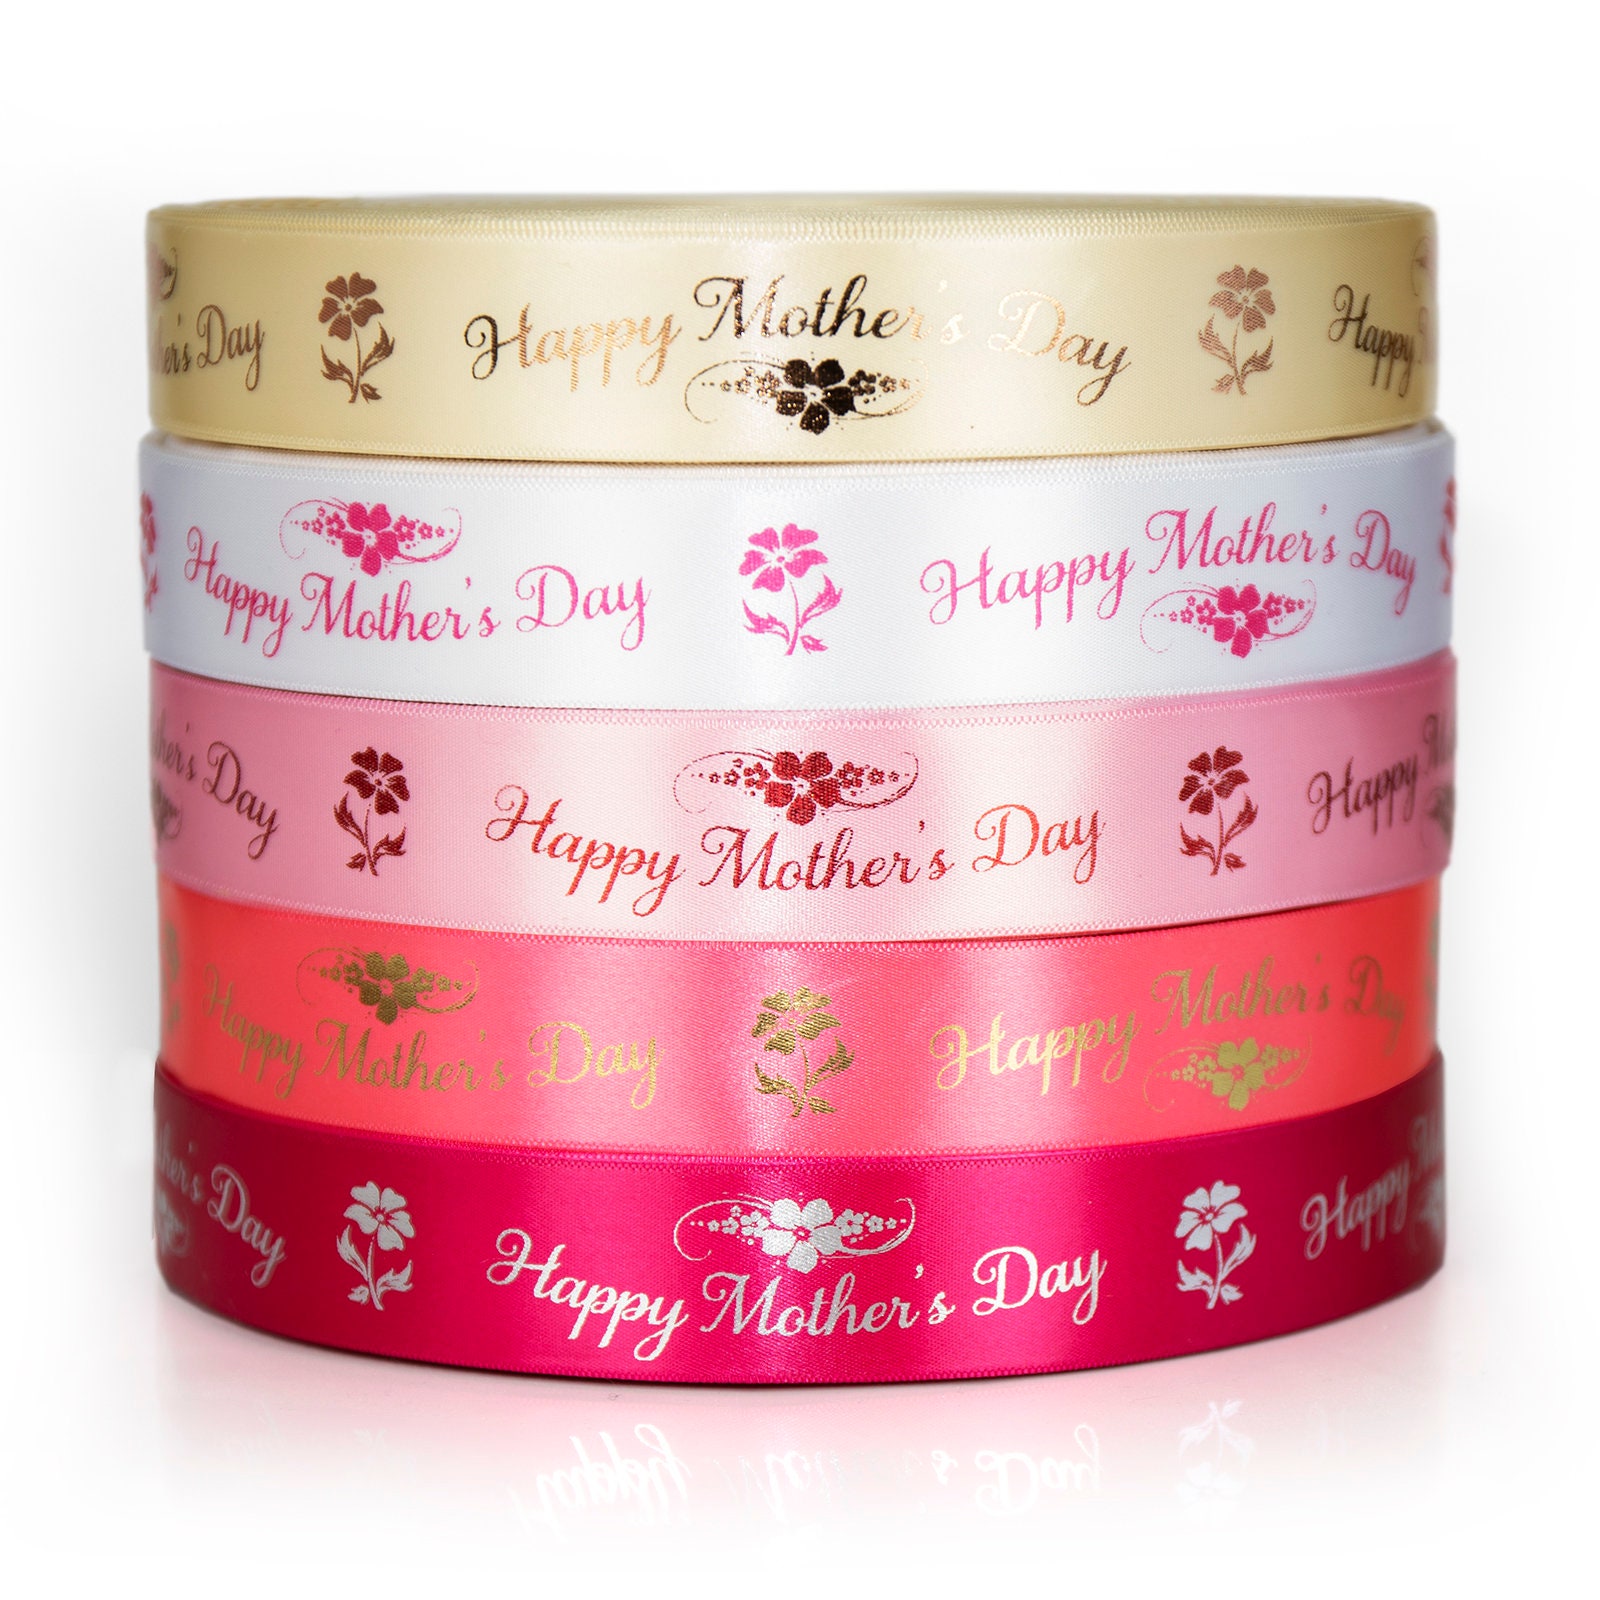 QIIBURR Ribbons and Bows for Gift Wrapping Mothers Day Gift